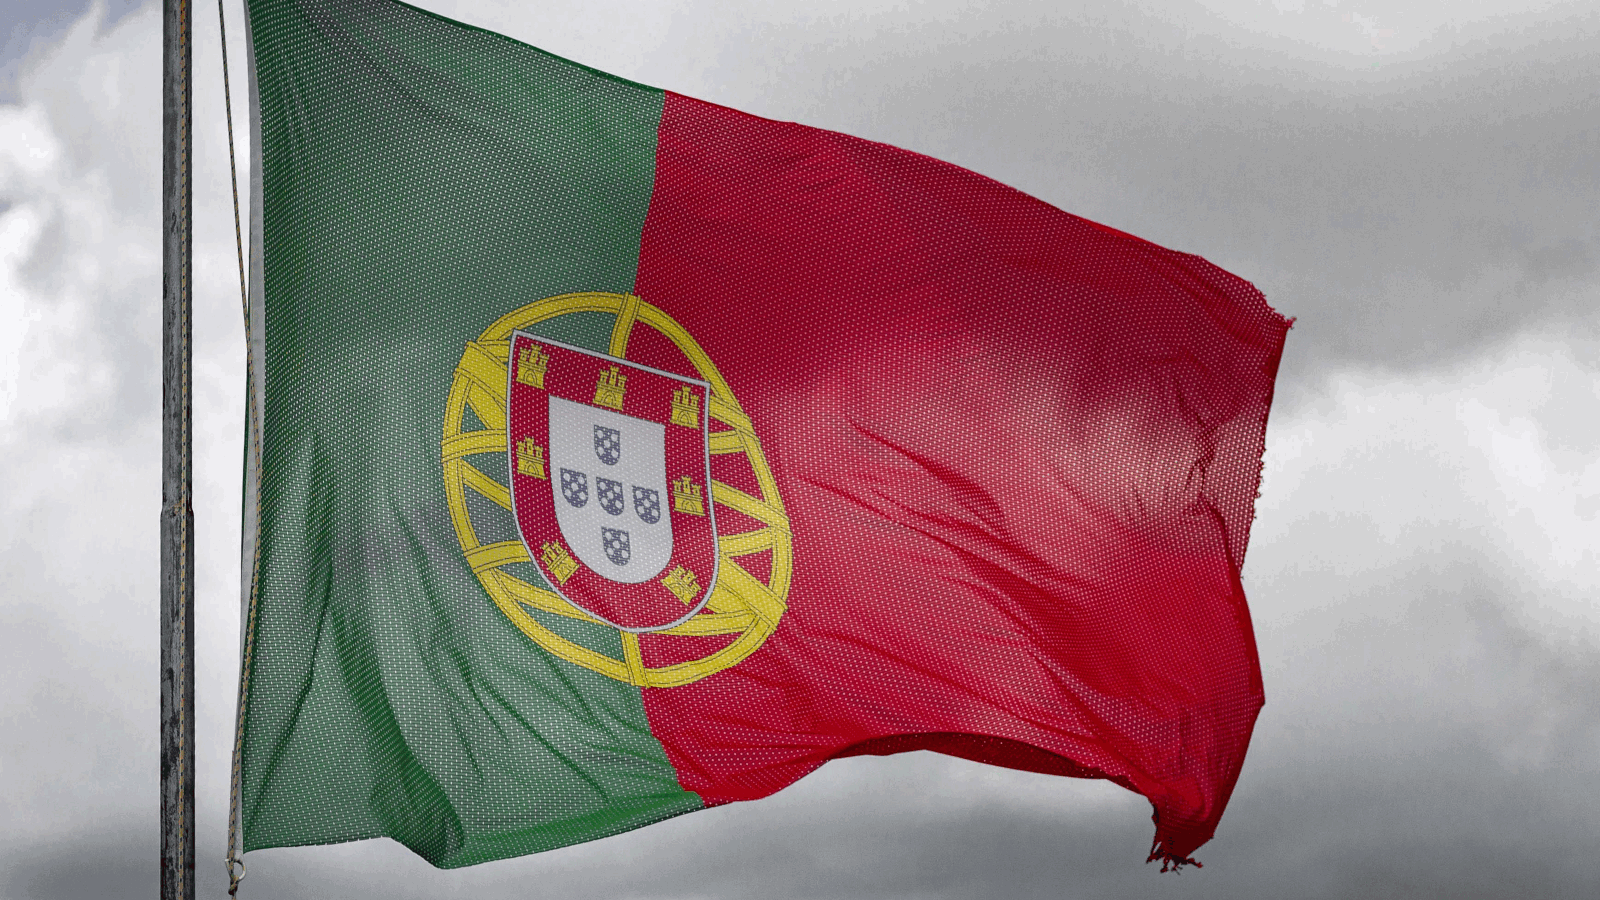 Classified NATO documents stolen from Portugal, now sold on darkweb